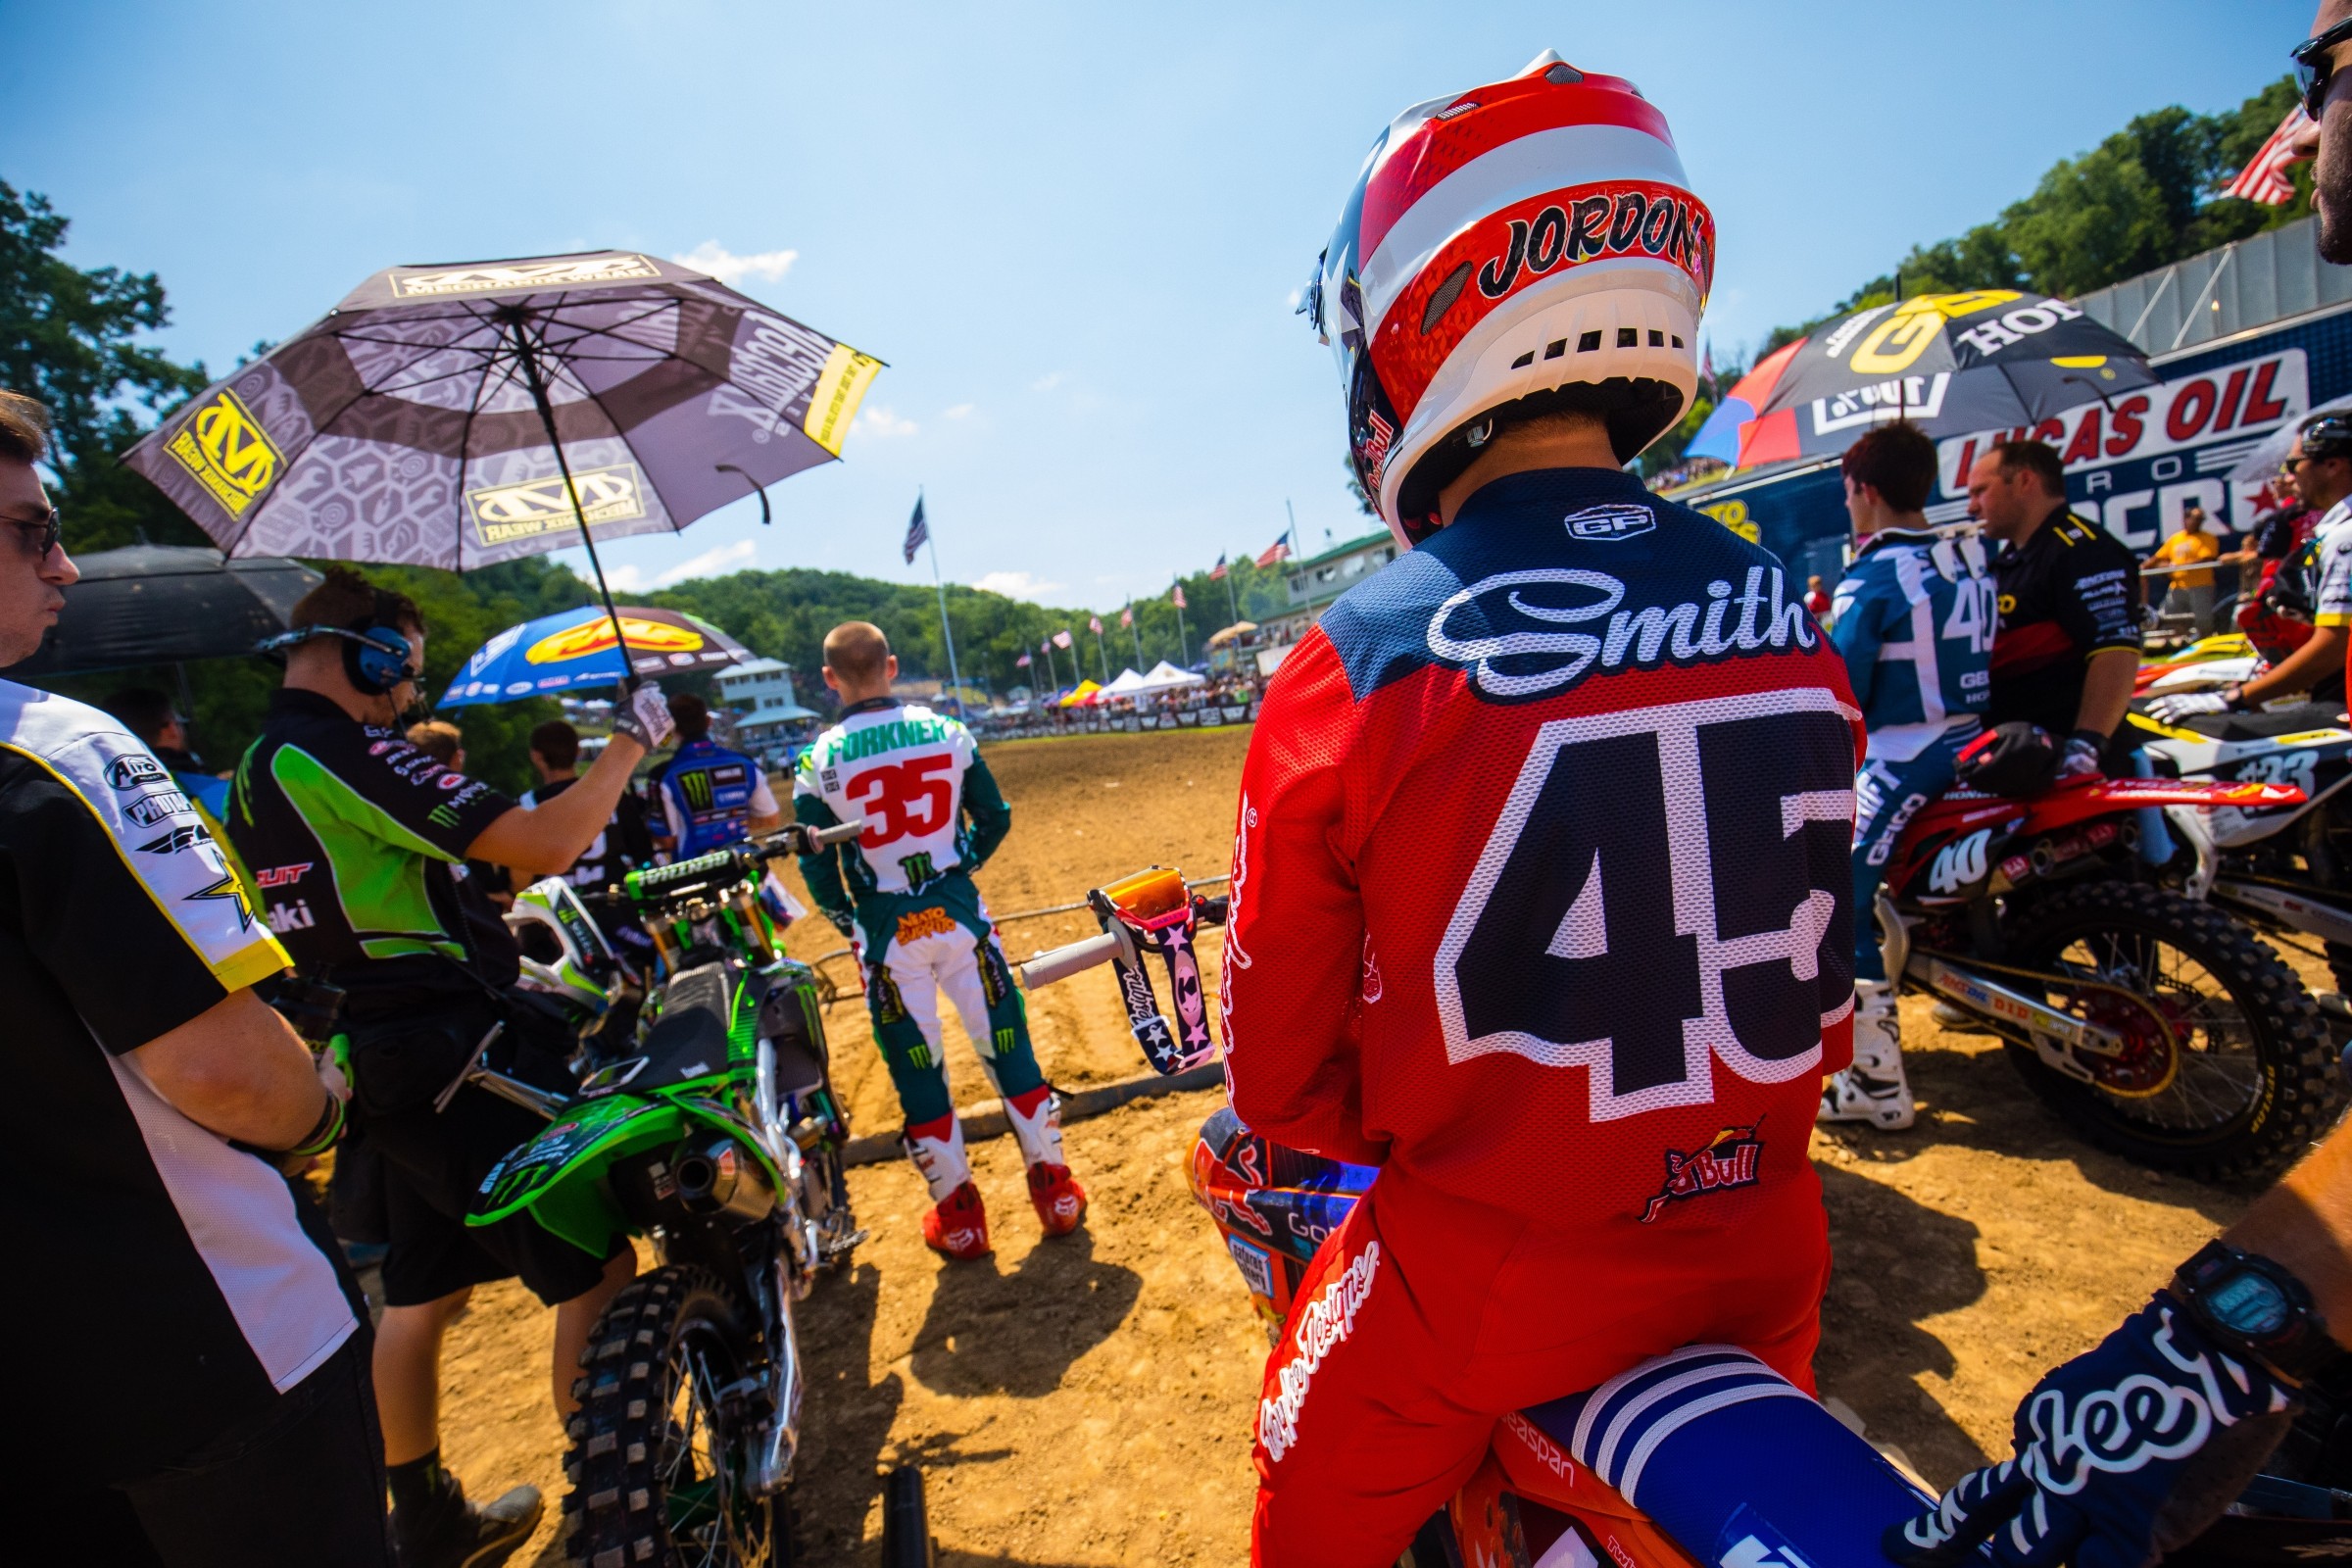 How to Watch 2018 Washougal National - Motocross